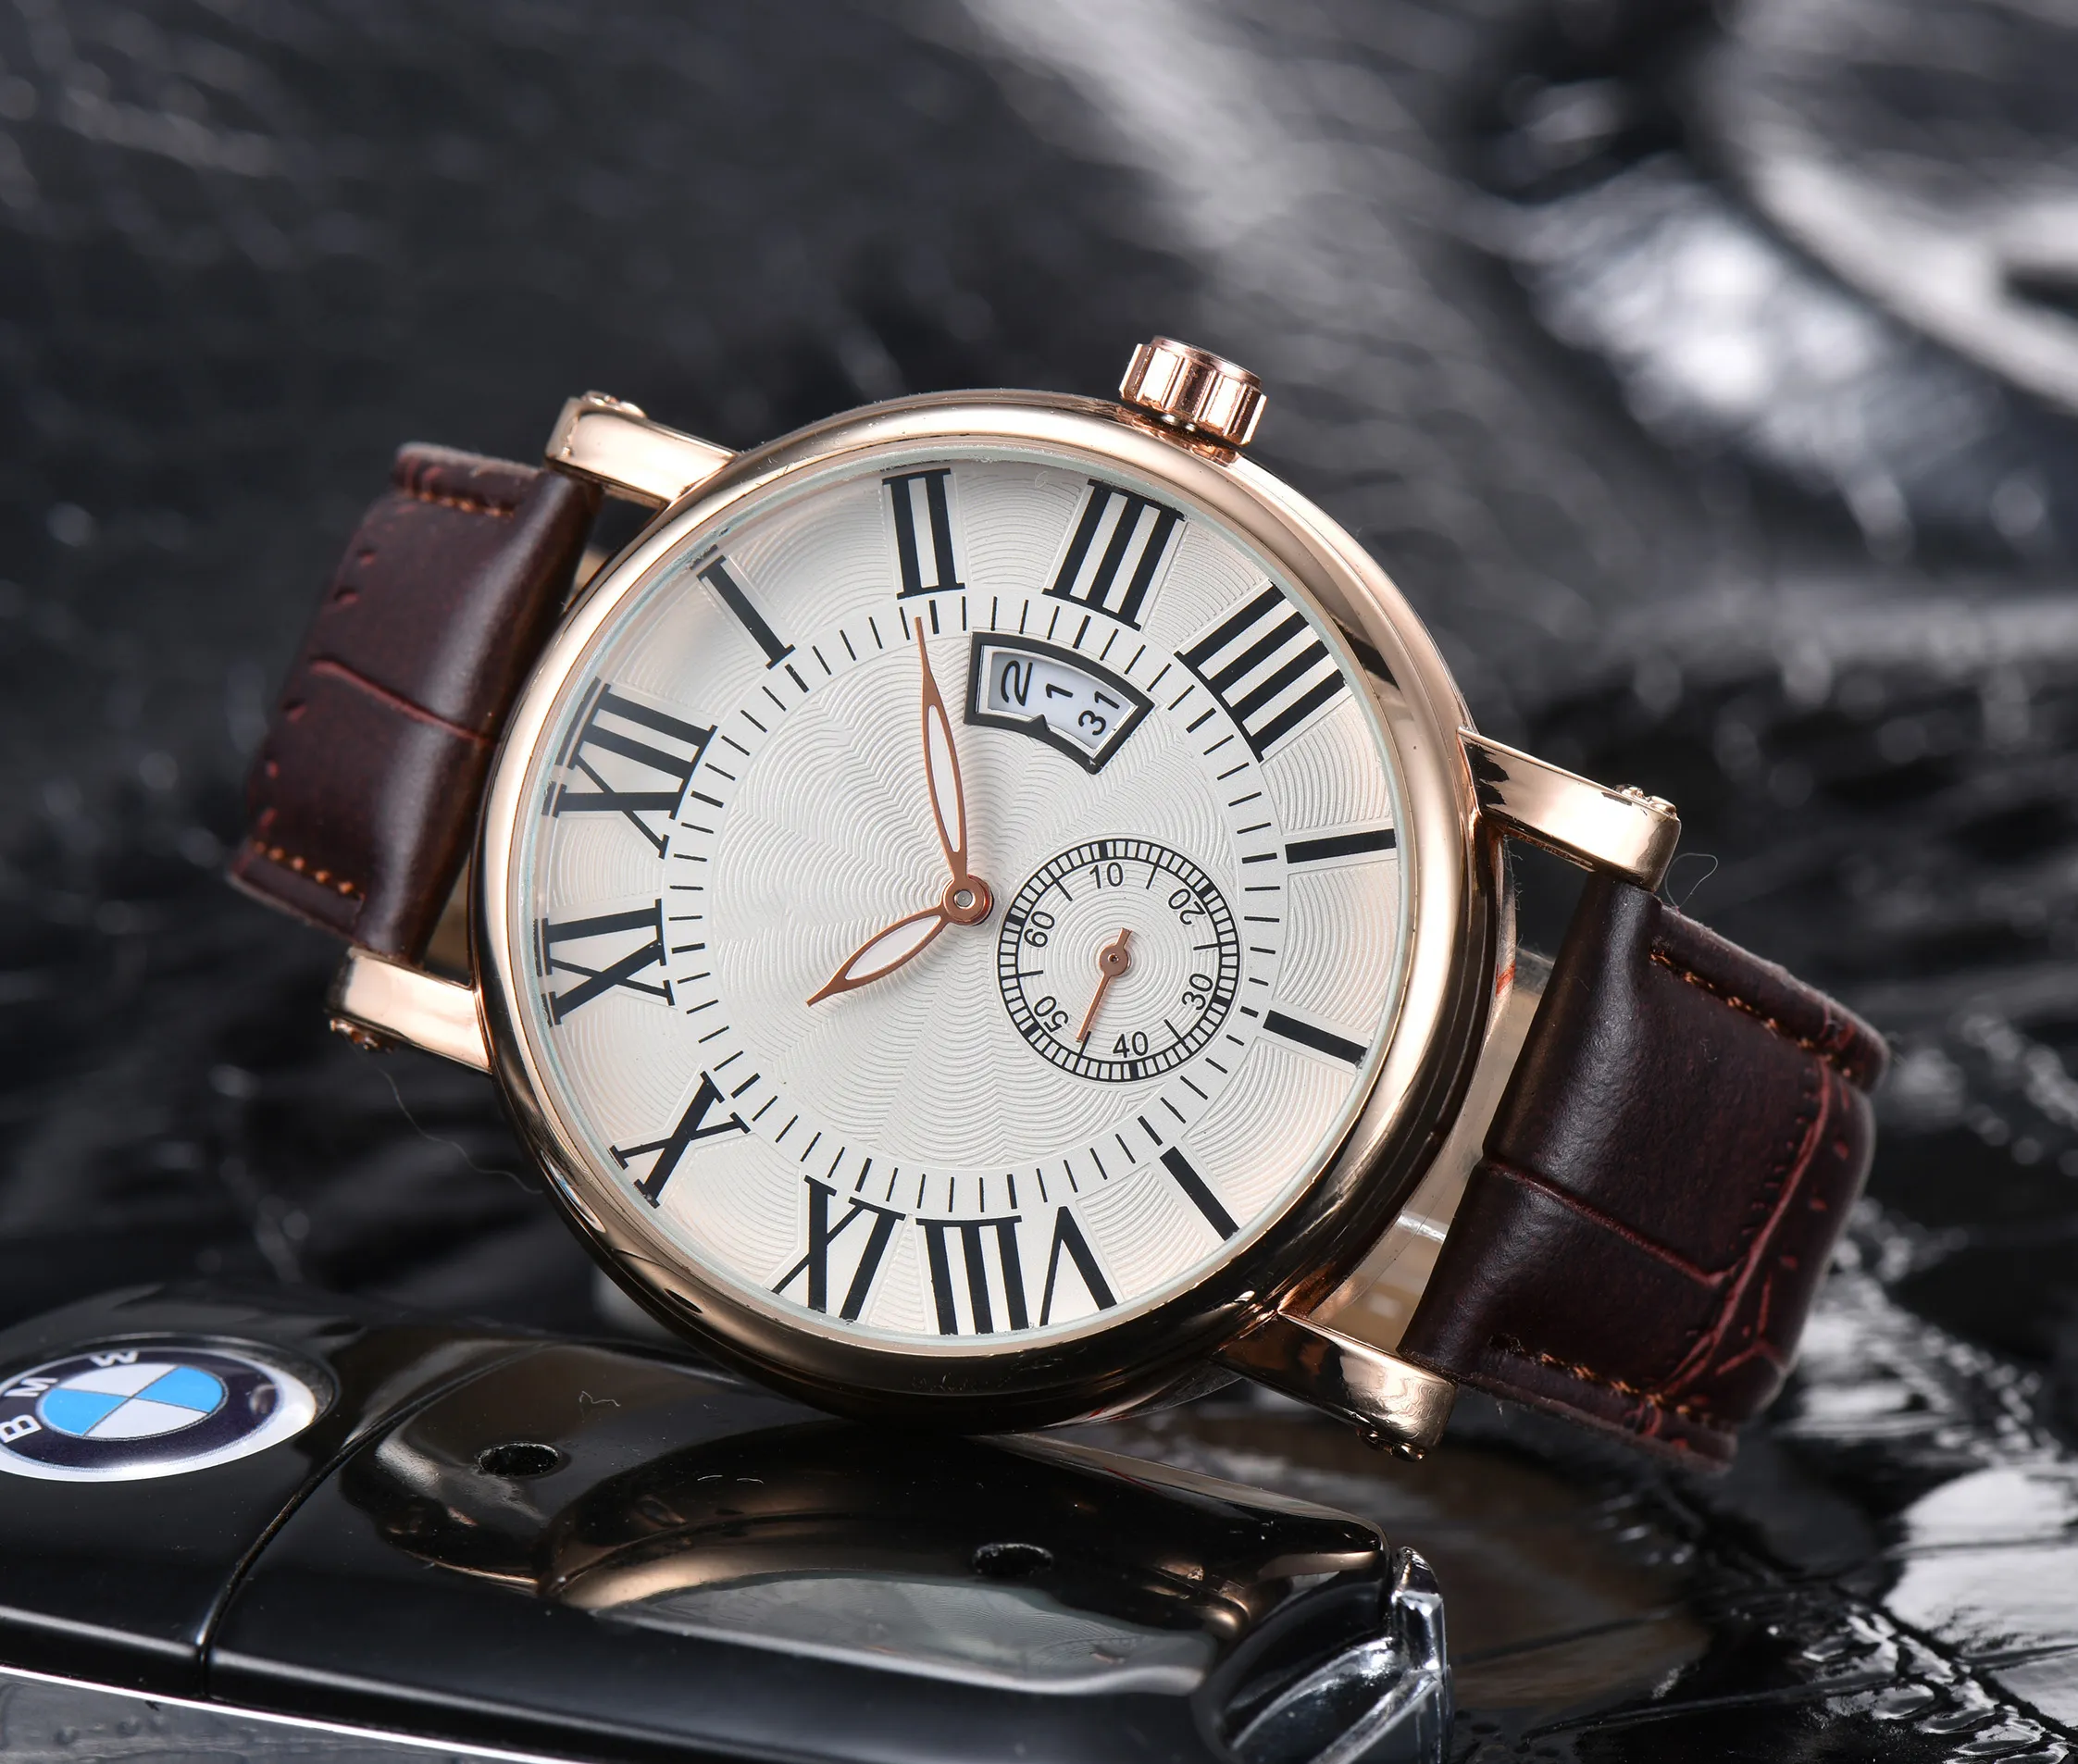 Luxury high-end men's quartz watch, calf leather strap, luminous waterproof watch, fashionable and trendy high-quality men's watch